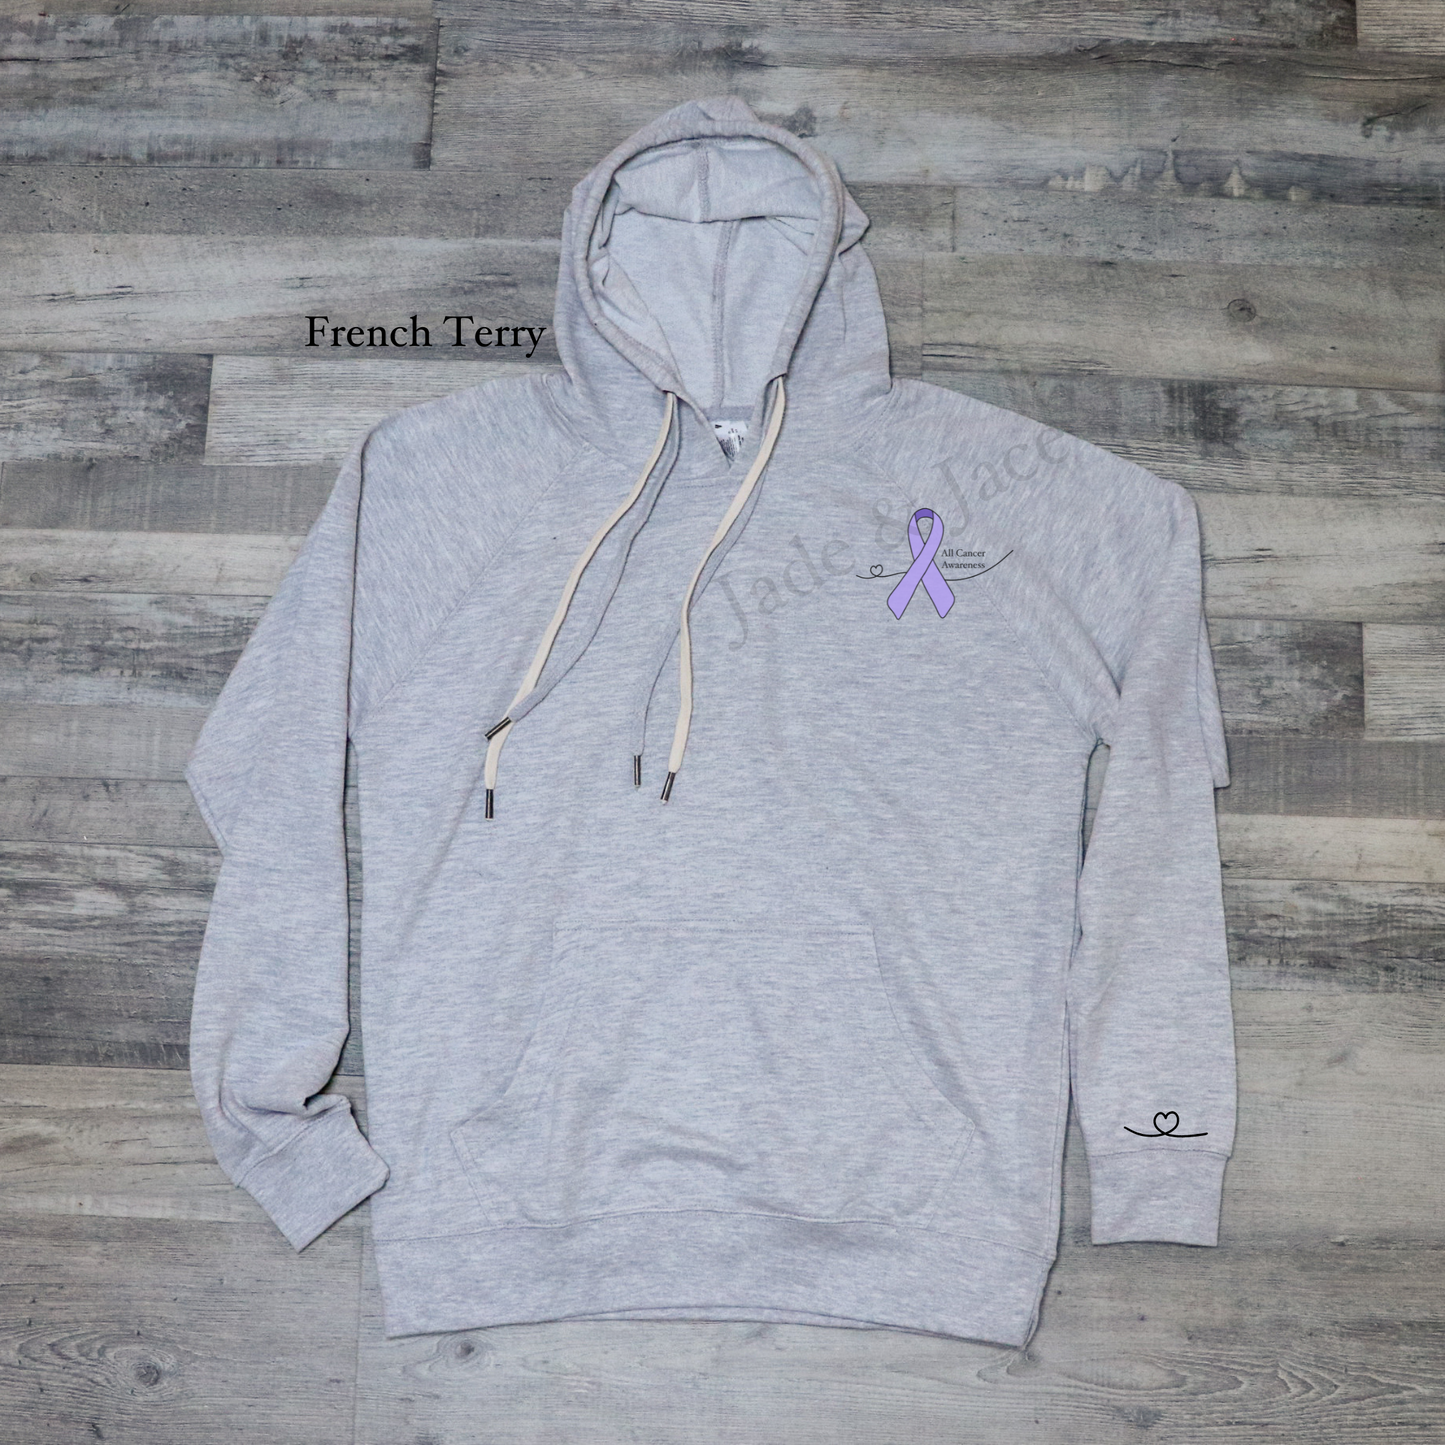 All Cancer Awareness Hoodie